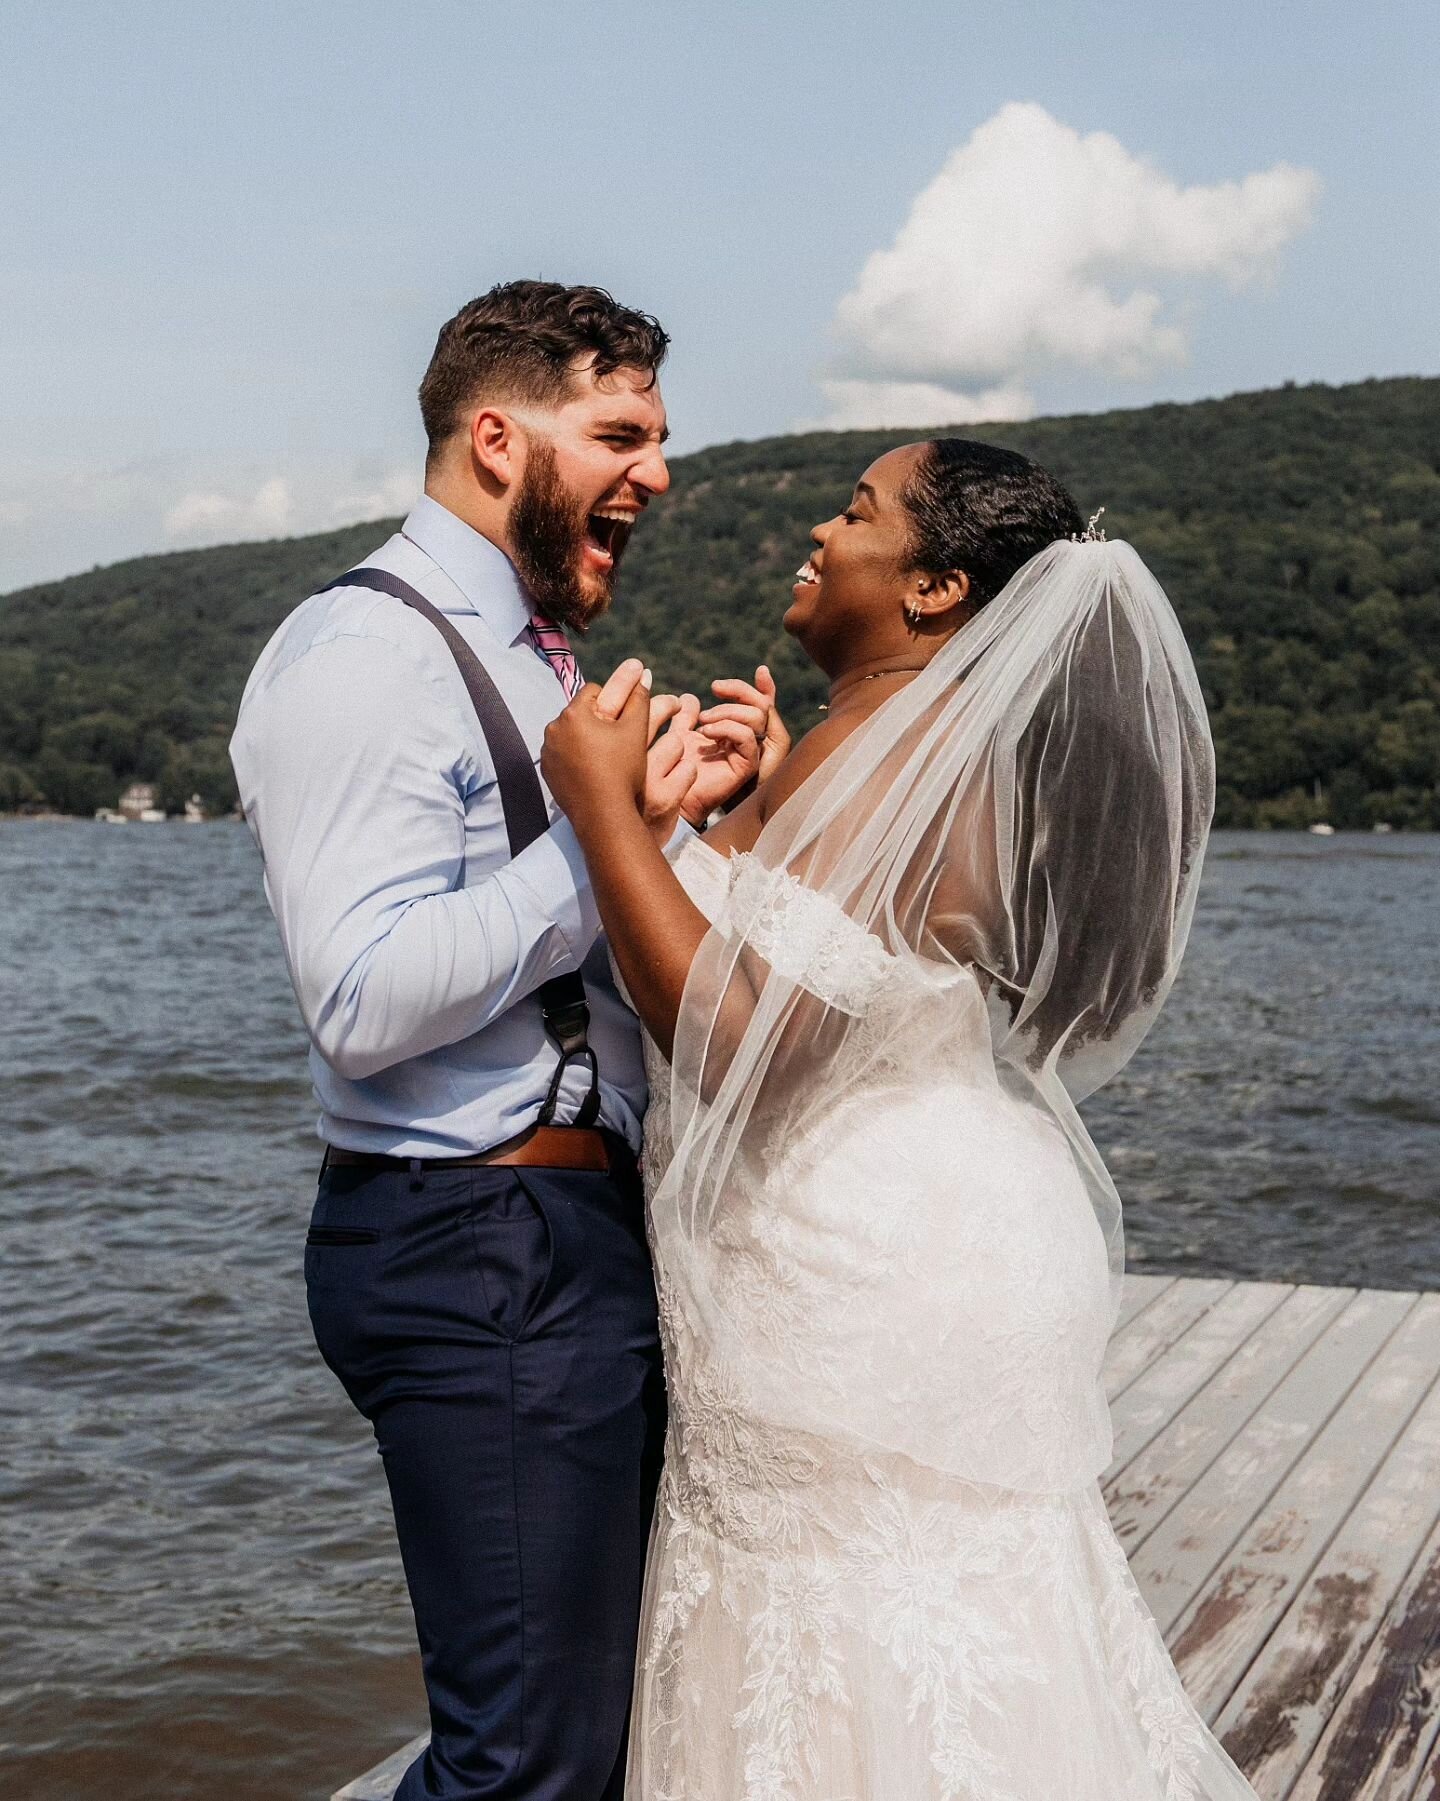 Sometimes you just love your partner so much you want to eat their face. Is anyone else missing summer weddings on the lake? 🥲 Swipe to see a very special someone rip their pants 🤣
.
.
.
.
.
#catskillsweddingphotographer #albanyweddingphotographer 